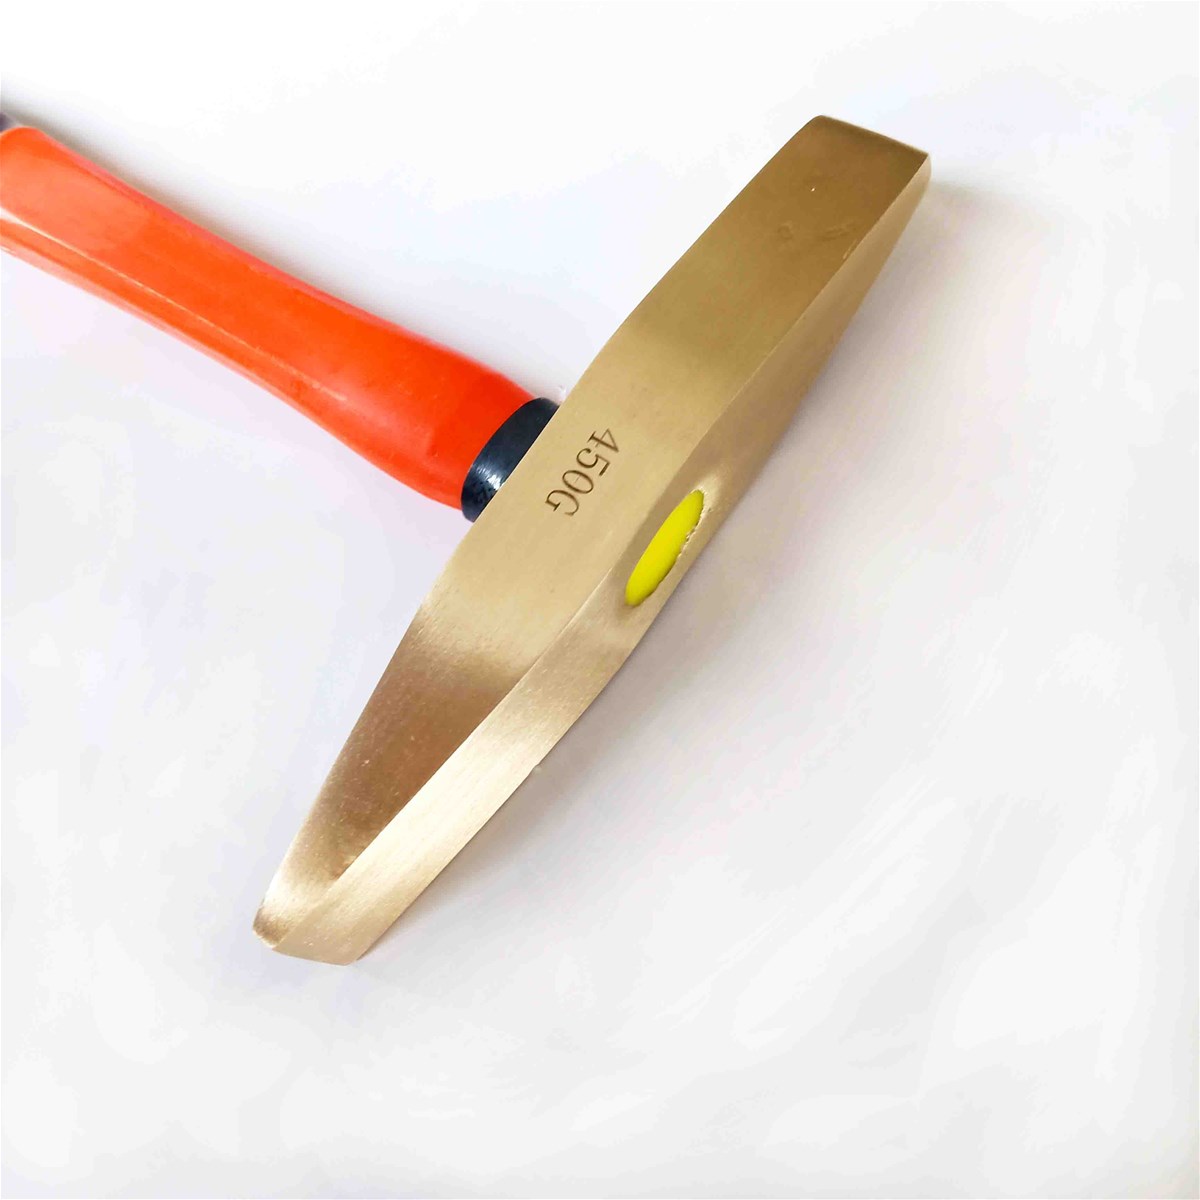 Hammer Scaling Fiber Handle 450g Alcu high quality nonsparking tools